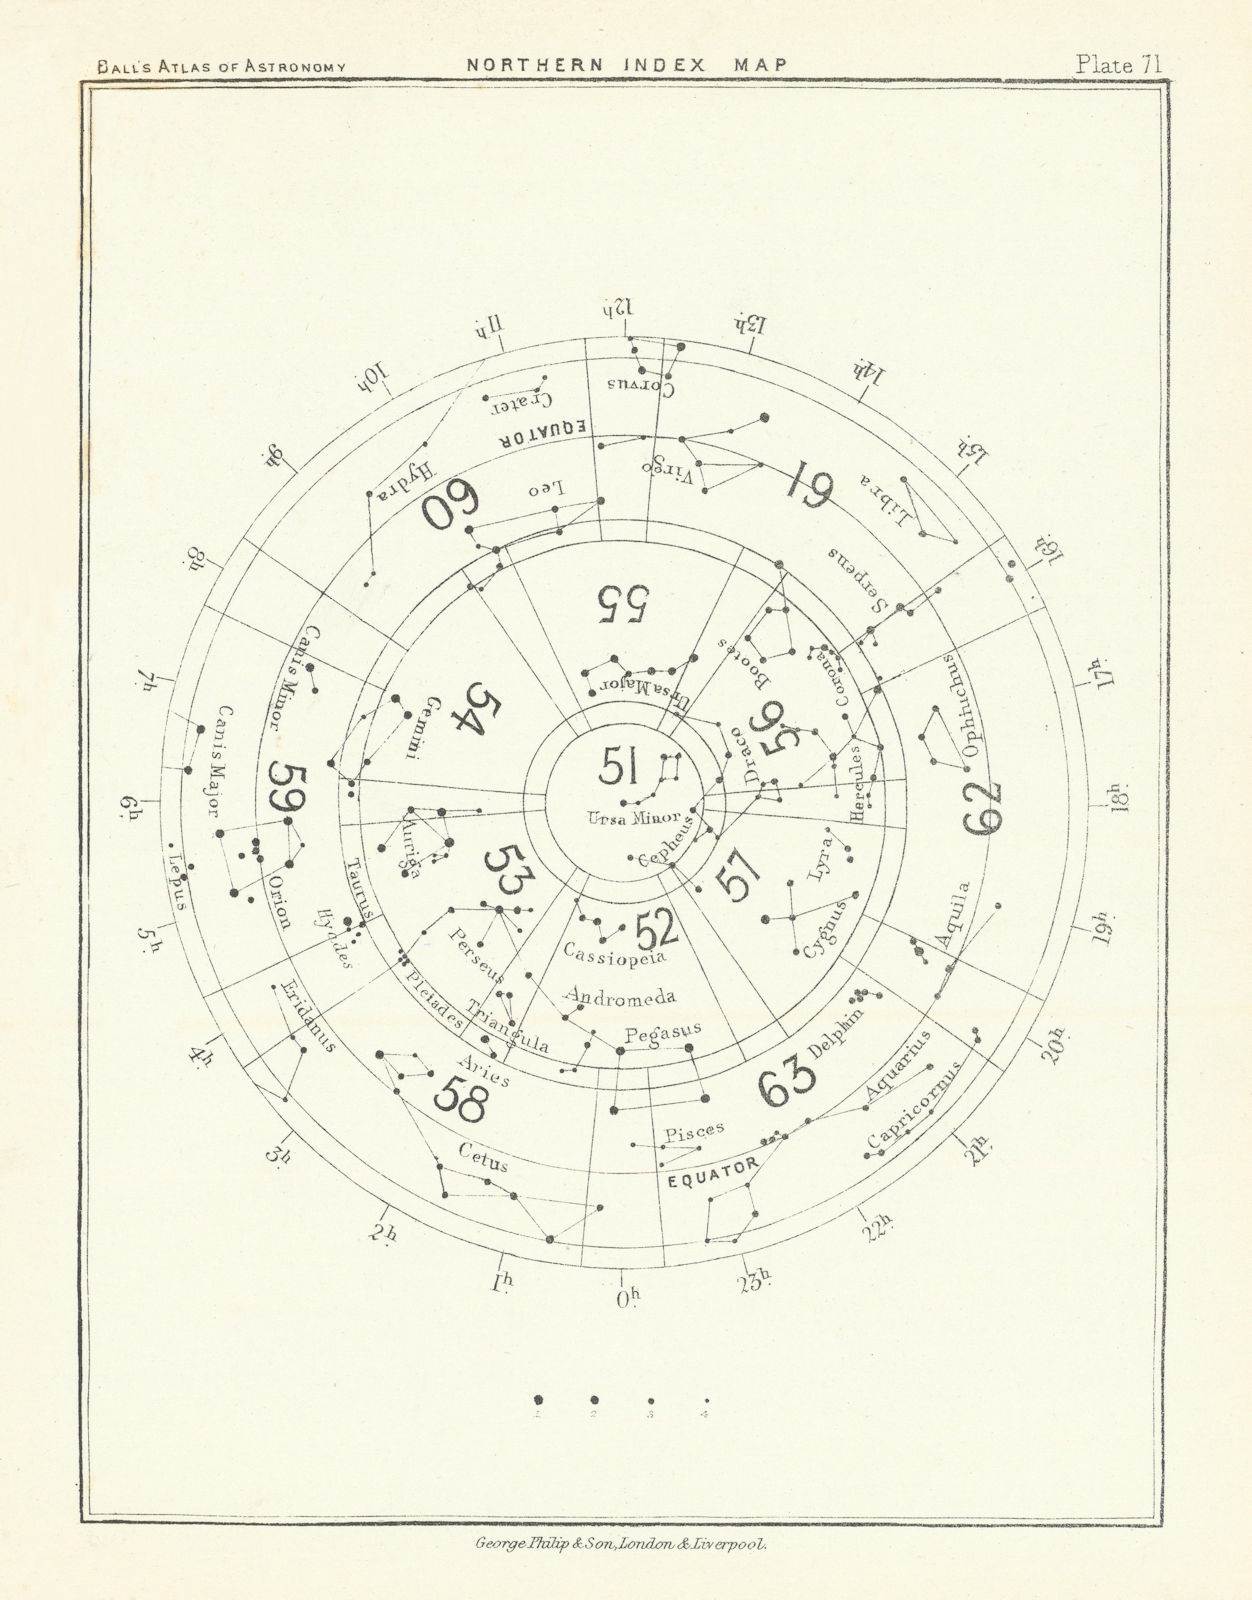 Night Sky Star Chart. Northern Index Map by Robert Ball. Astronomy 1892